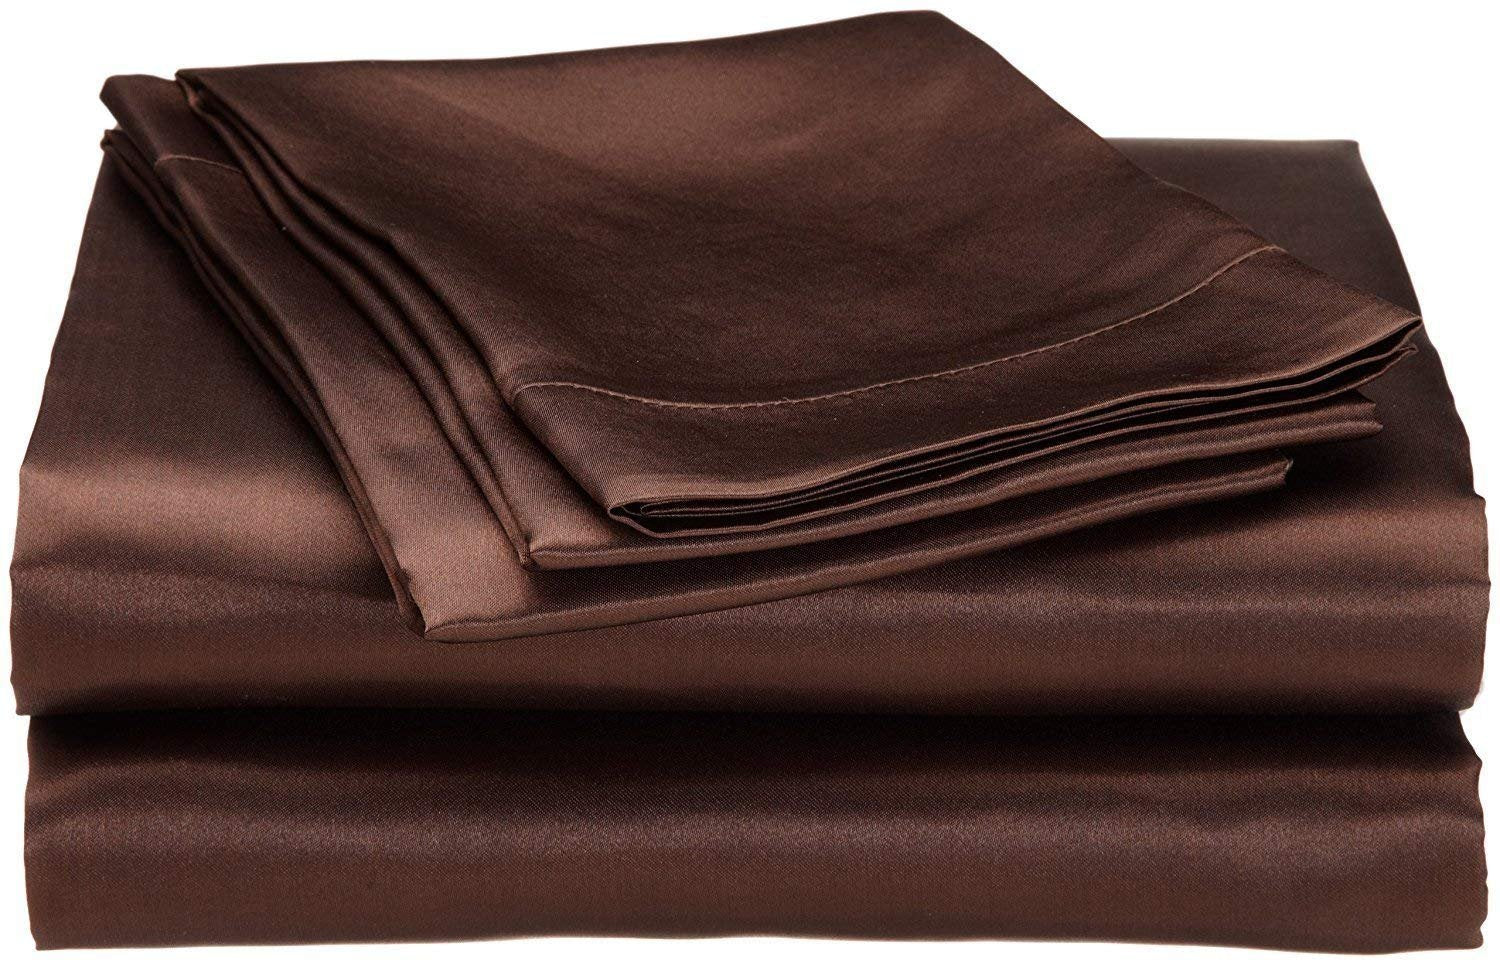 14 Inch Pocket Sheet Set Mulberry Sateen Silk Chocolate at-www.egyptianhomelinens.com